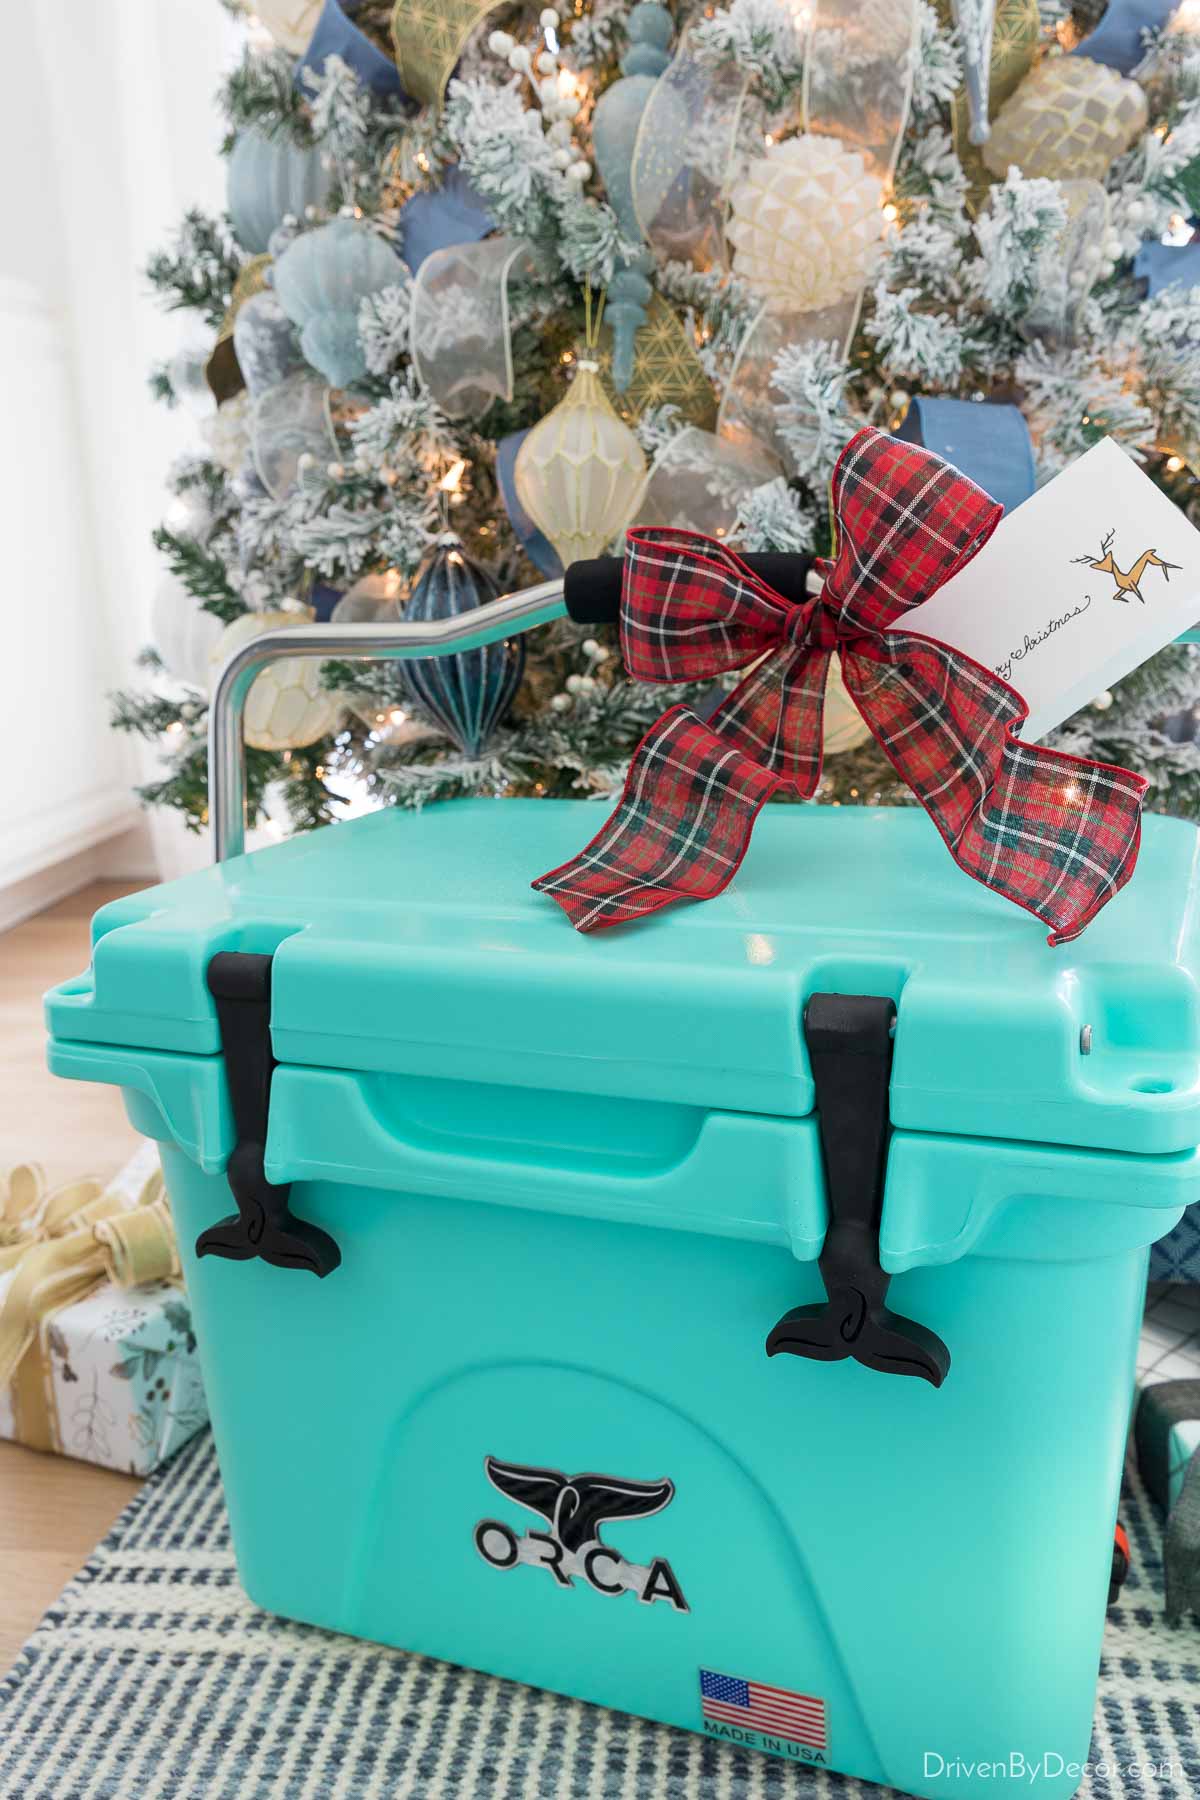 This colorful cooler makes a great couples holiday gift, especially gifted with a sailing adventure!